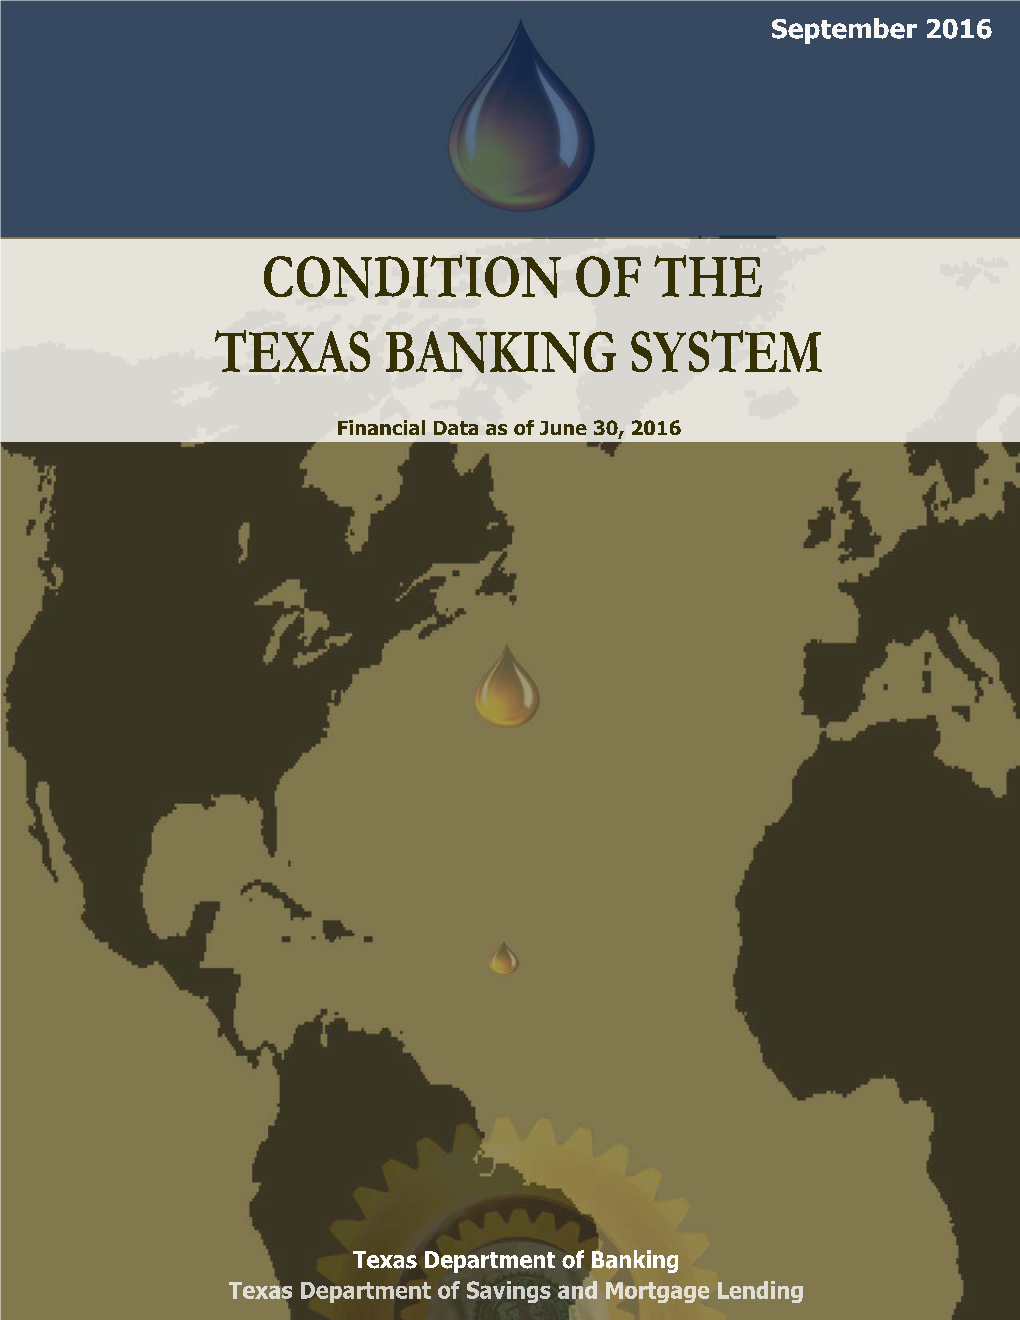 Condition of the Texas Banking System